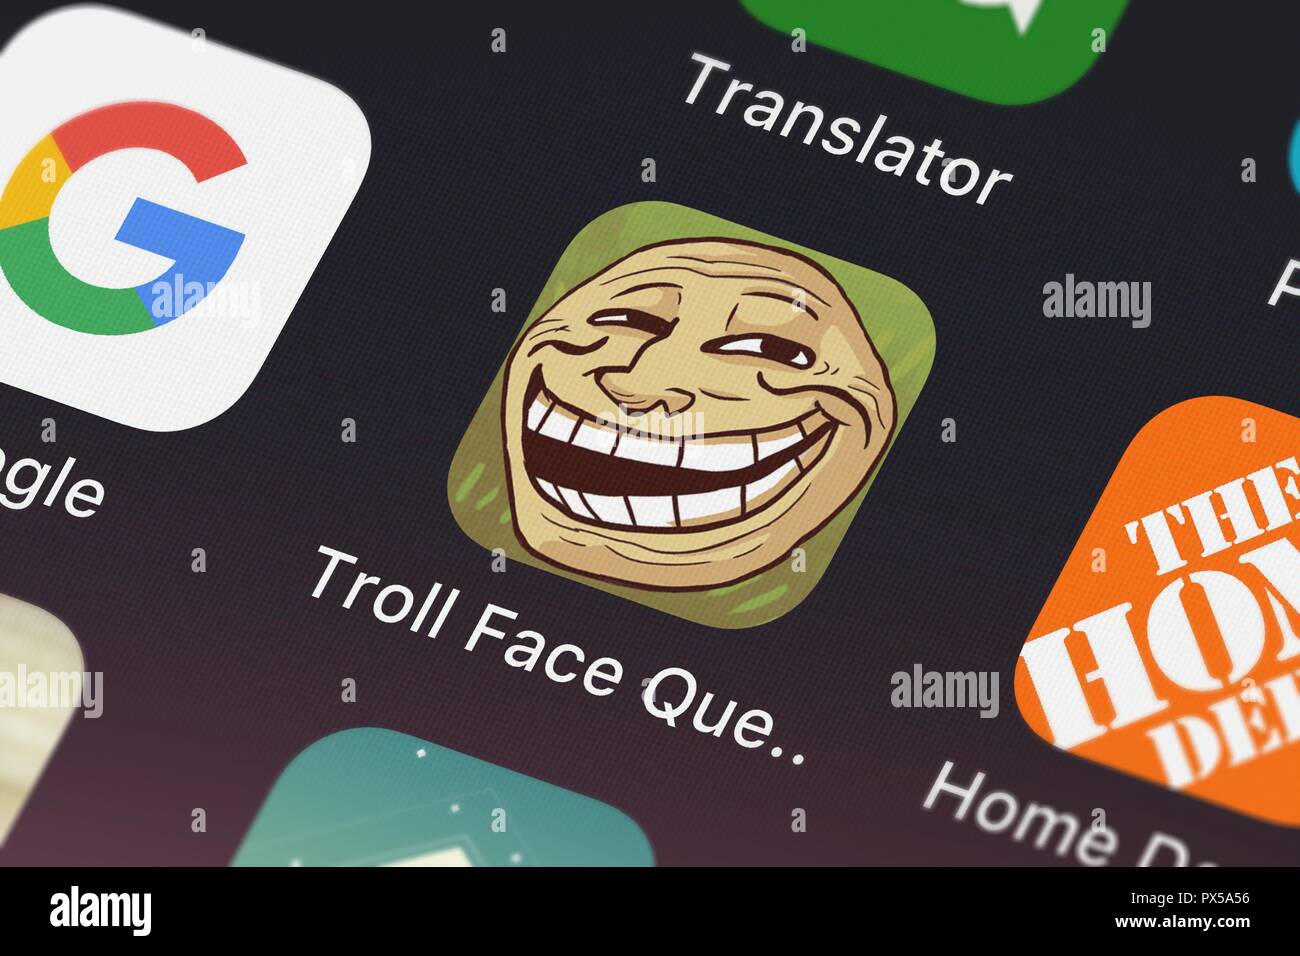 Troll Face Quest Sports on the App Store